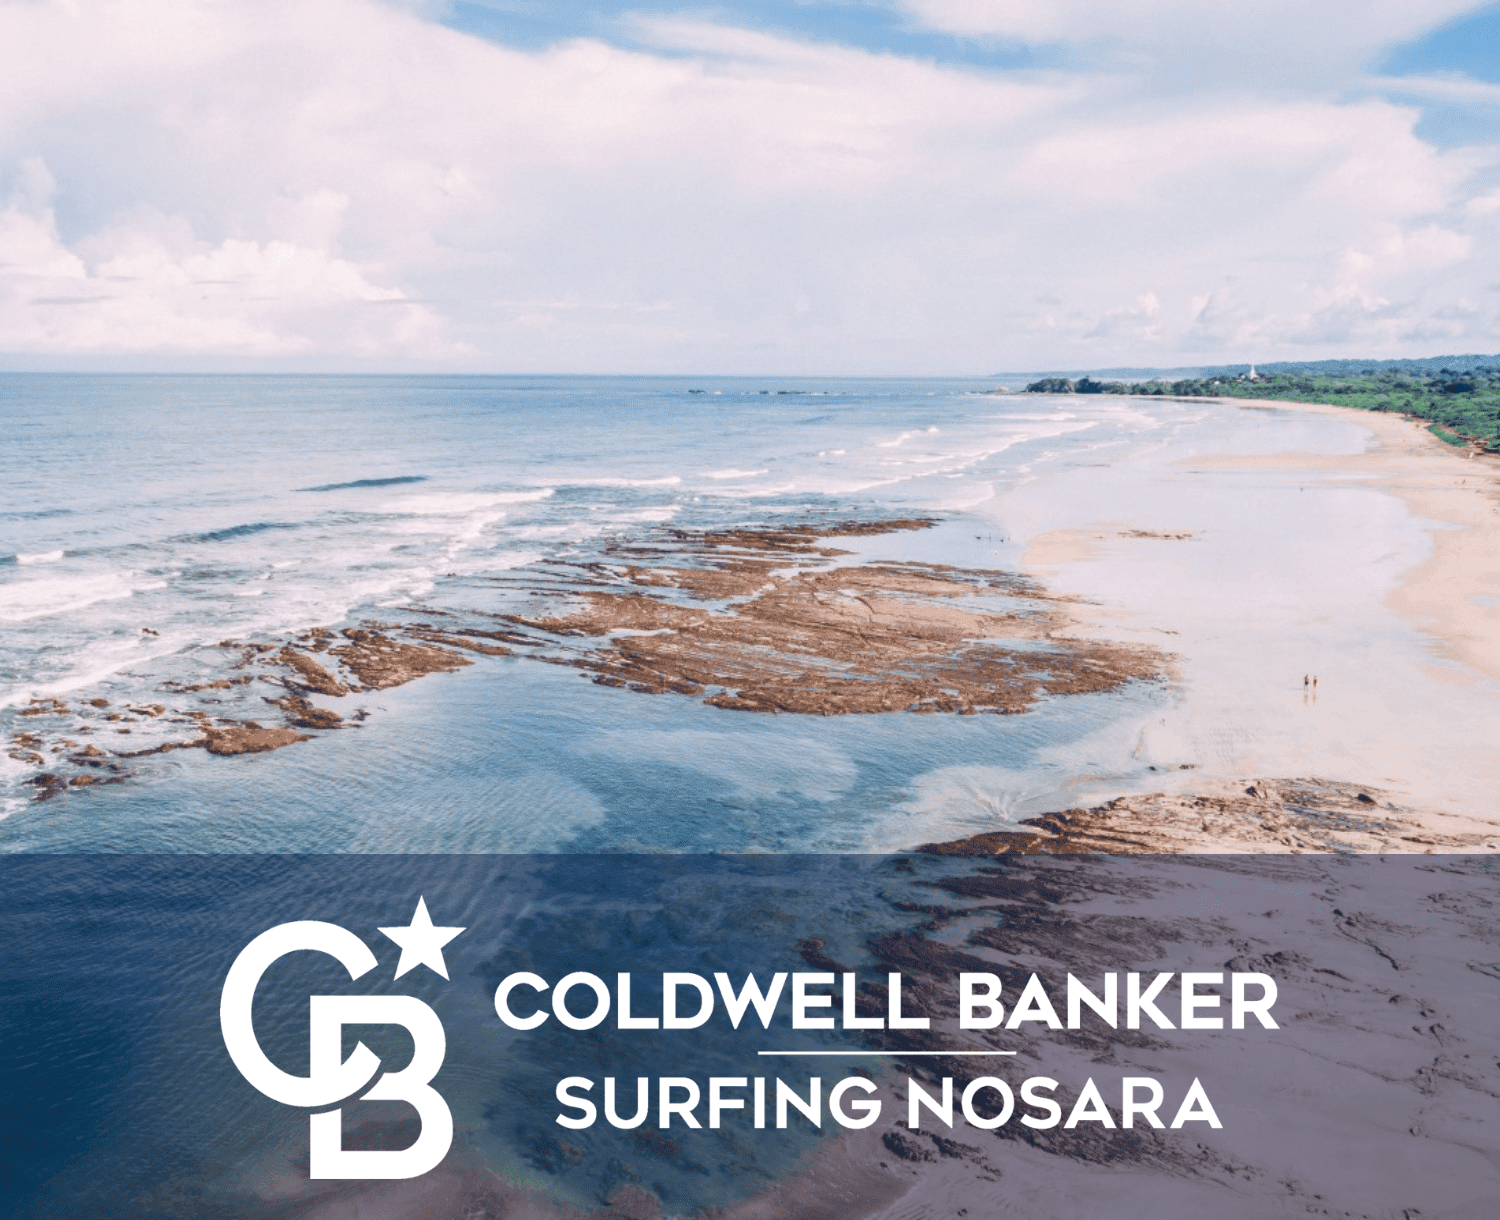 Coldwell Banker Surfing Nosara